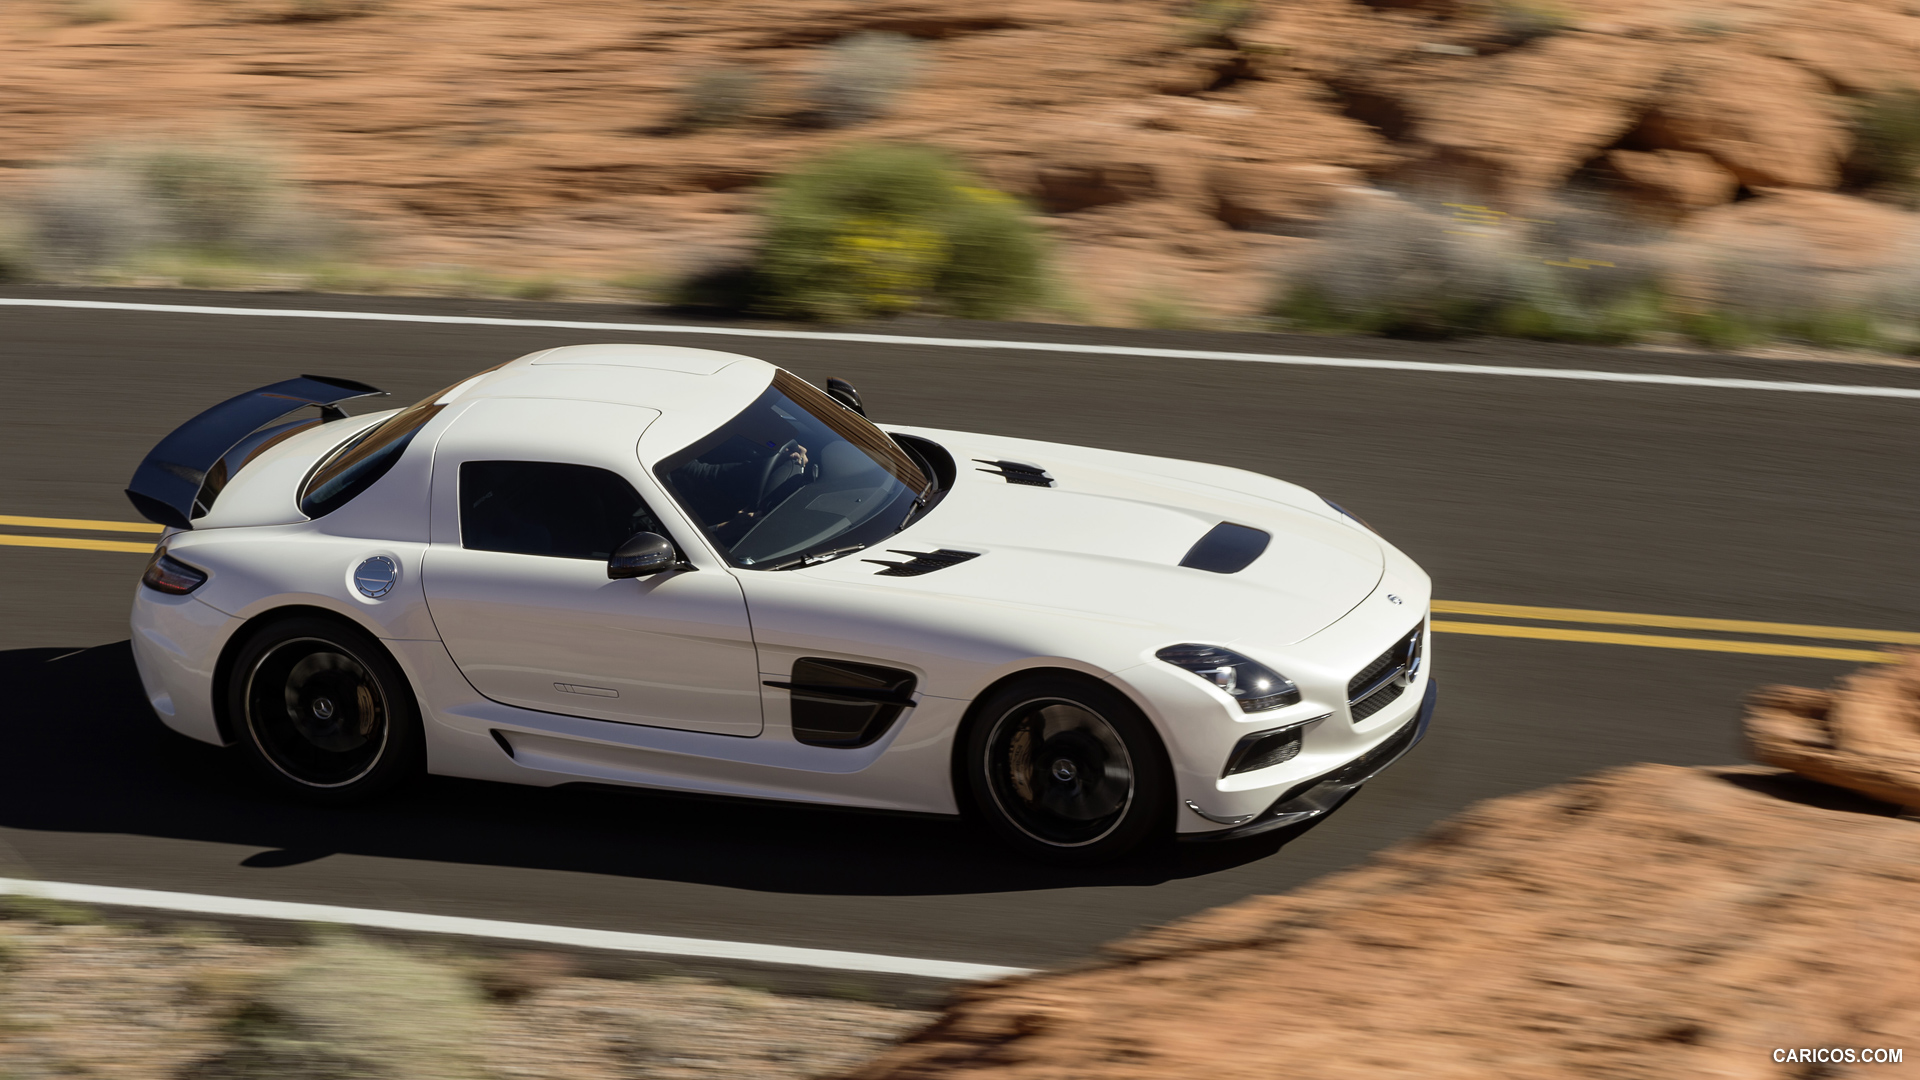 2014 Mercedes-Benz SLS AMG Coupe Black Series White - Top, #6 of 40